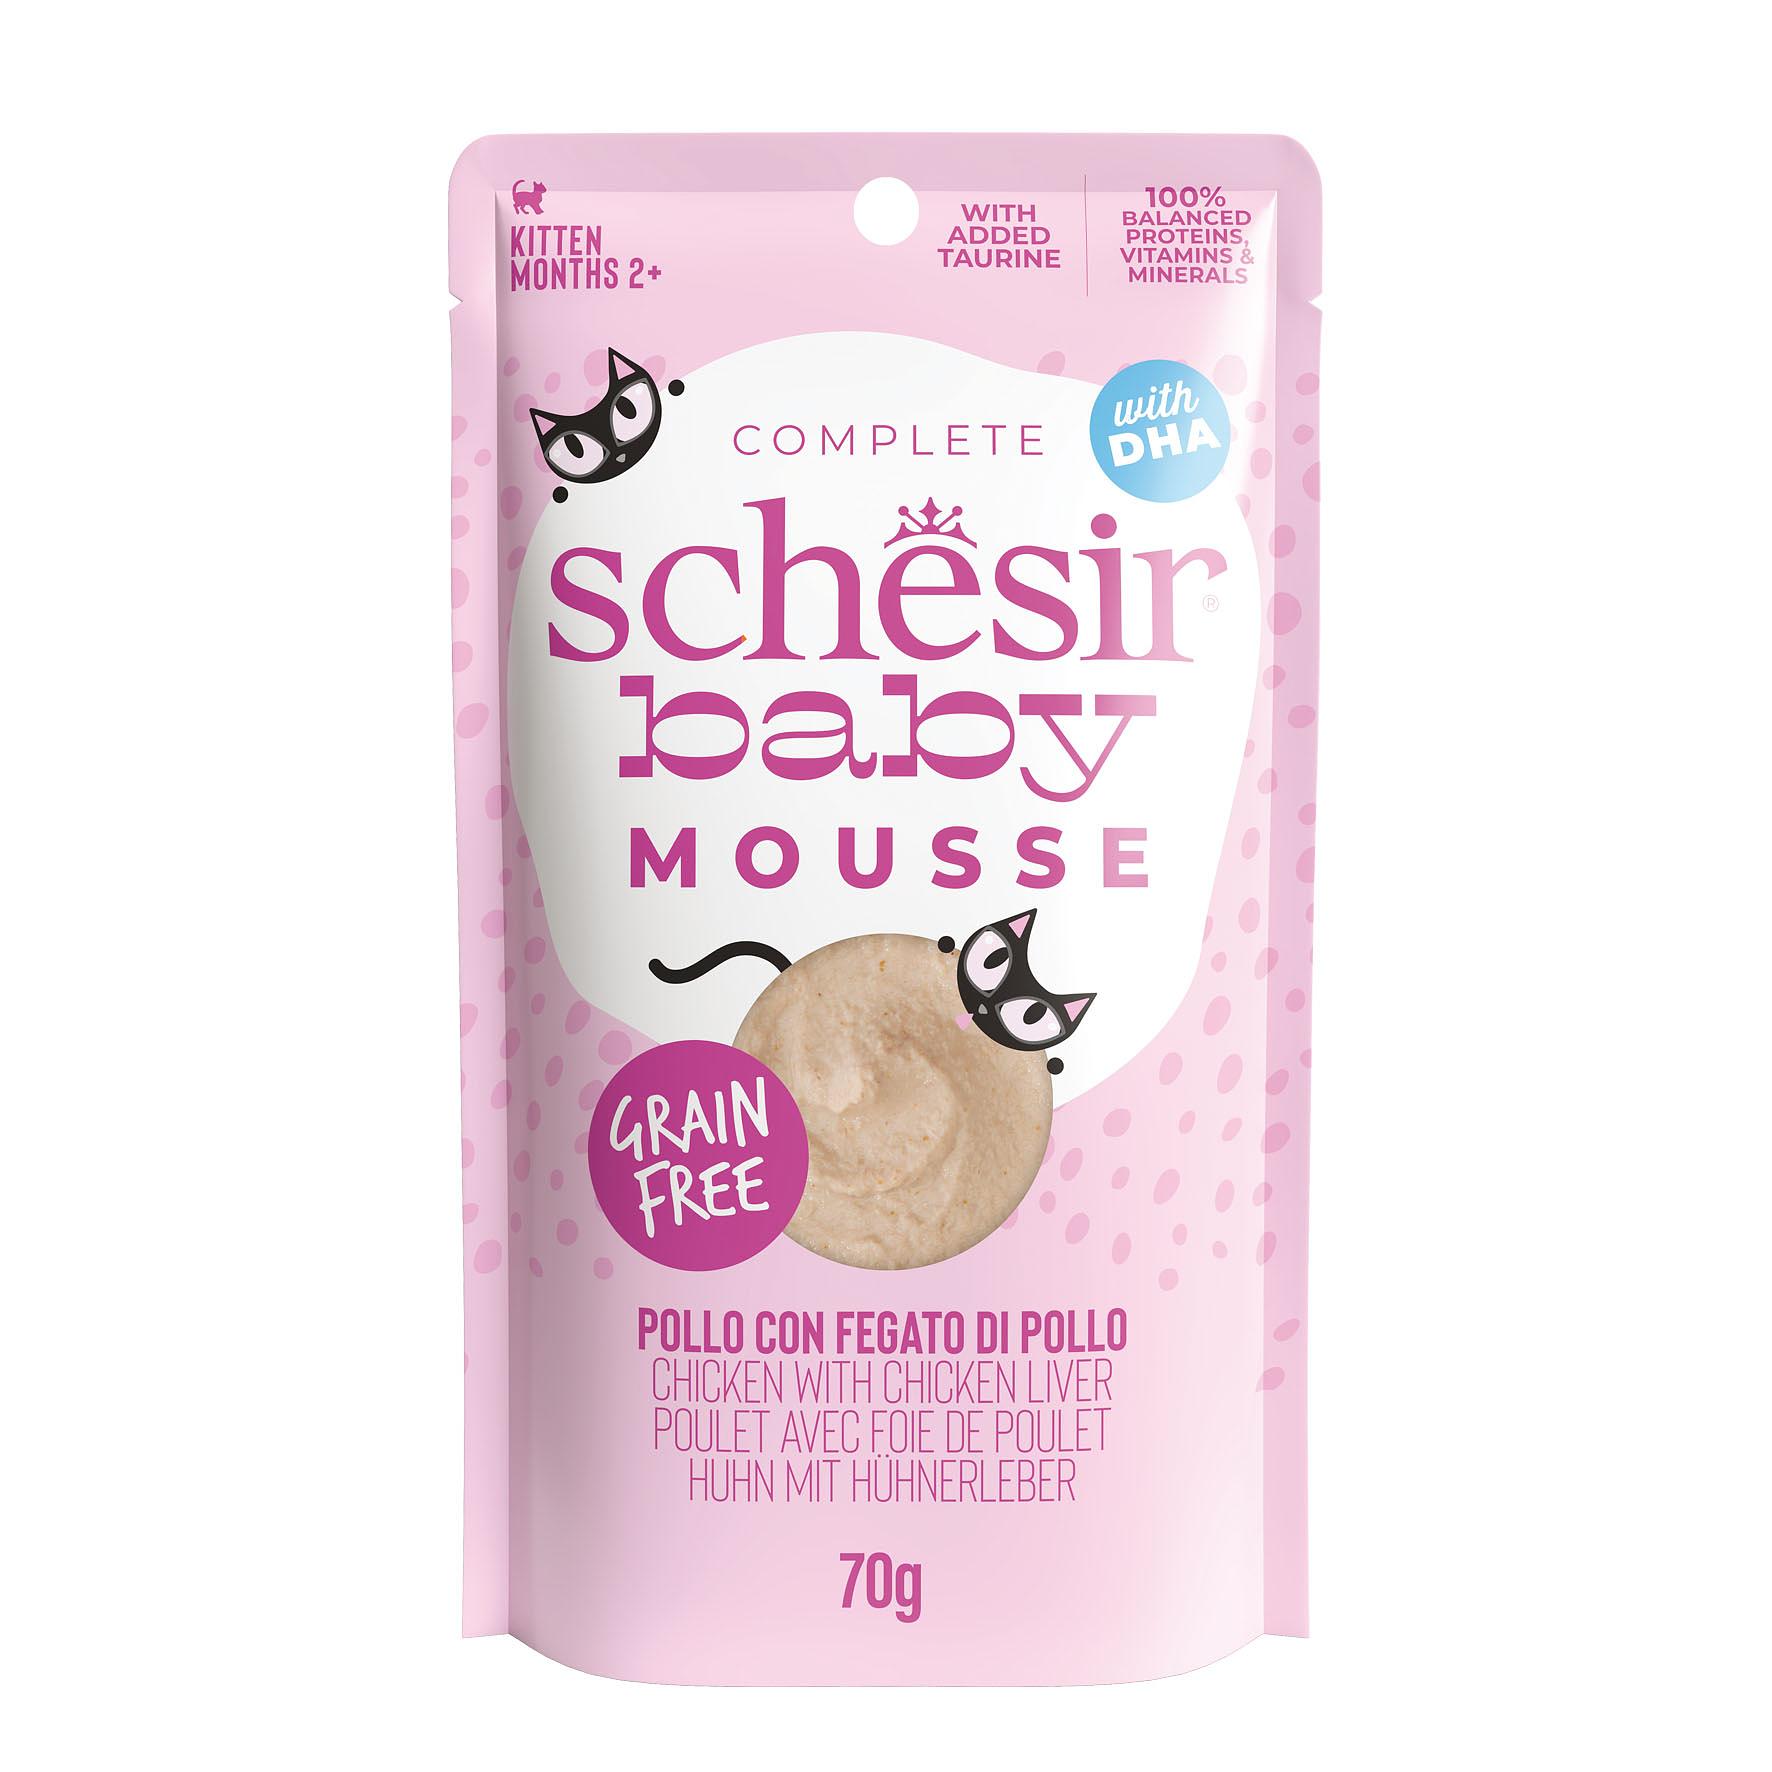 Schesir Baby Mousse